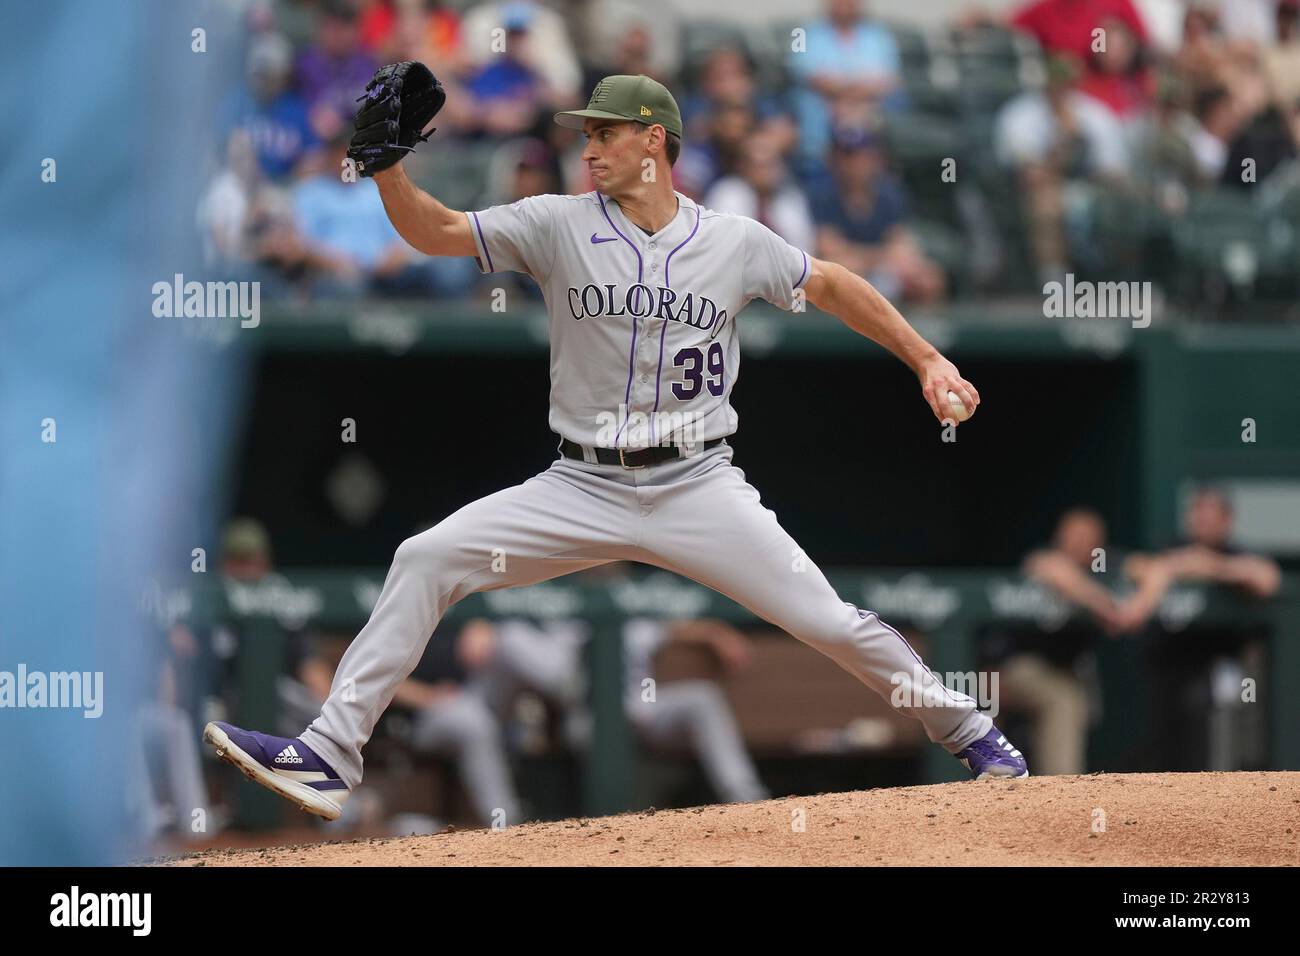 Colorado Rockies relief pitcher Brent Suter throws during a